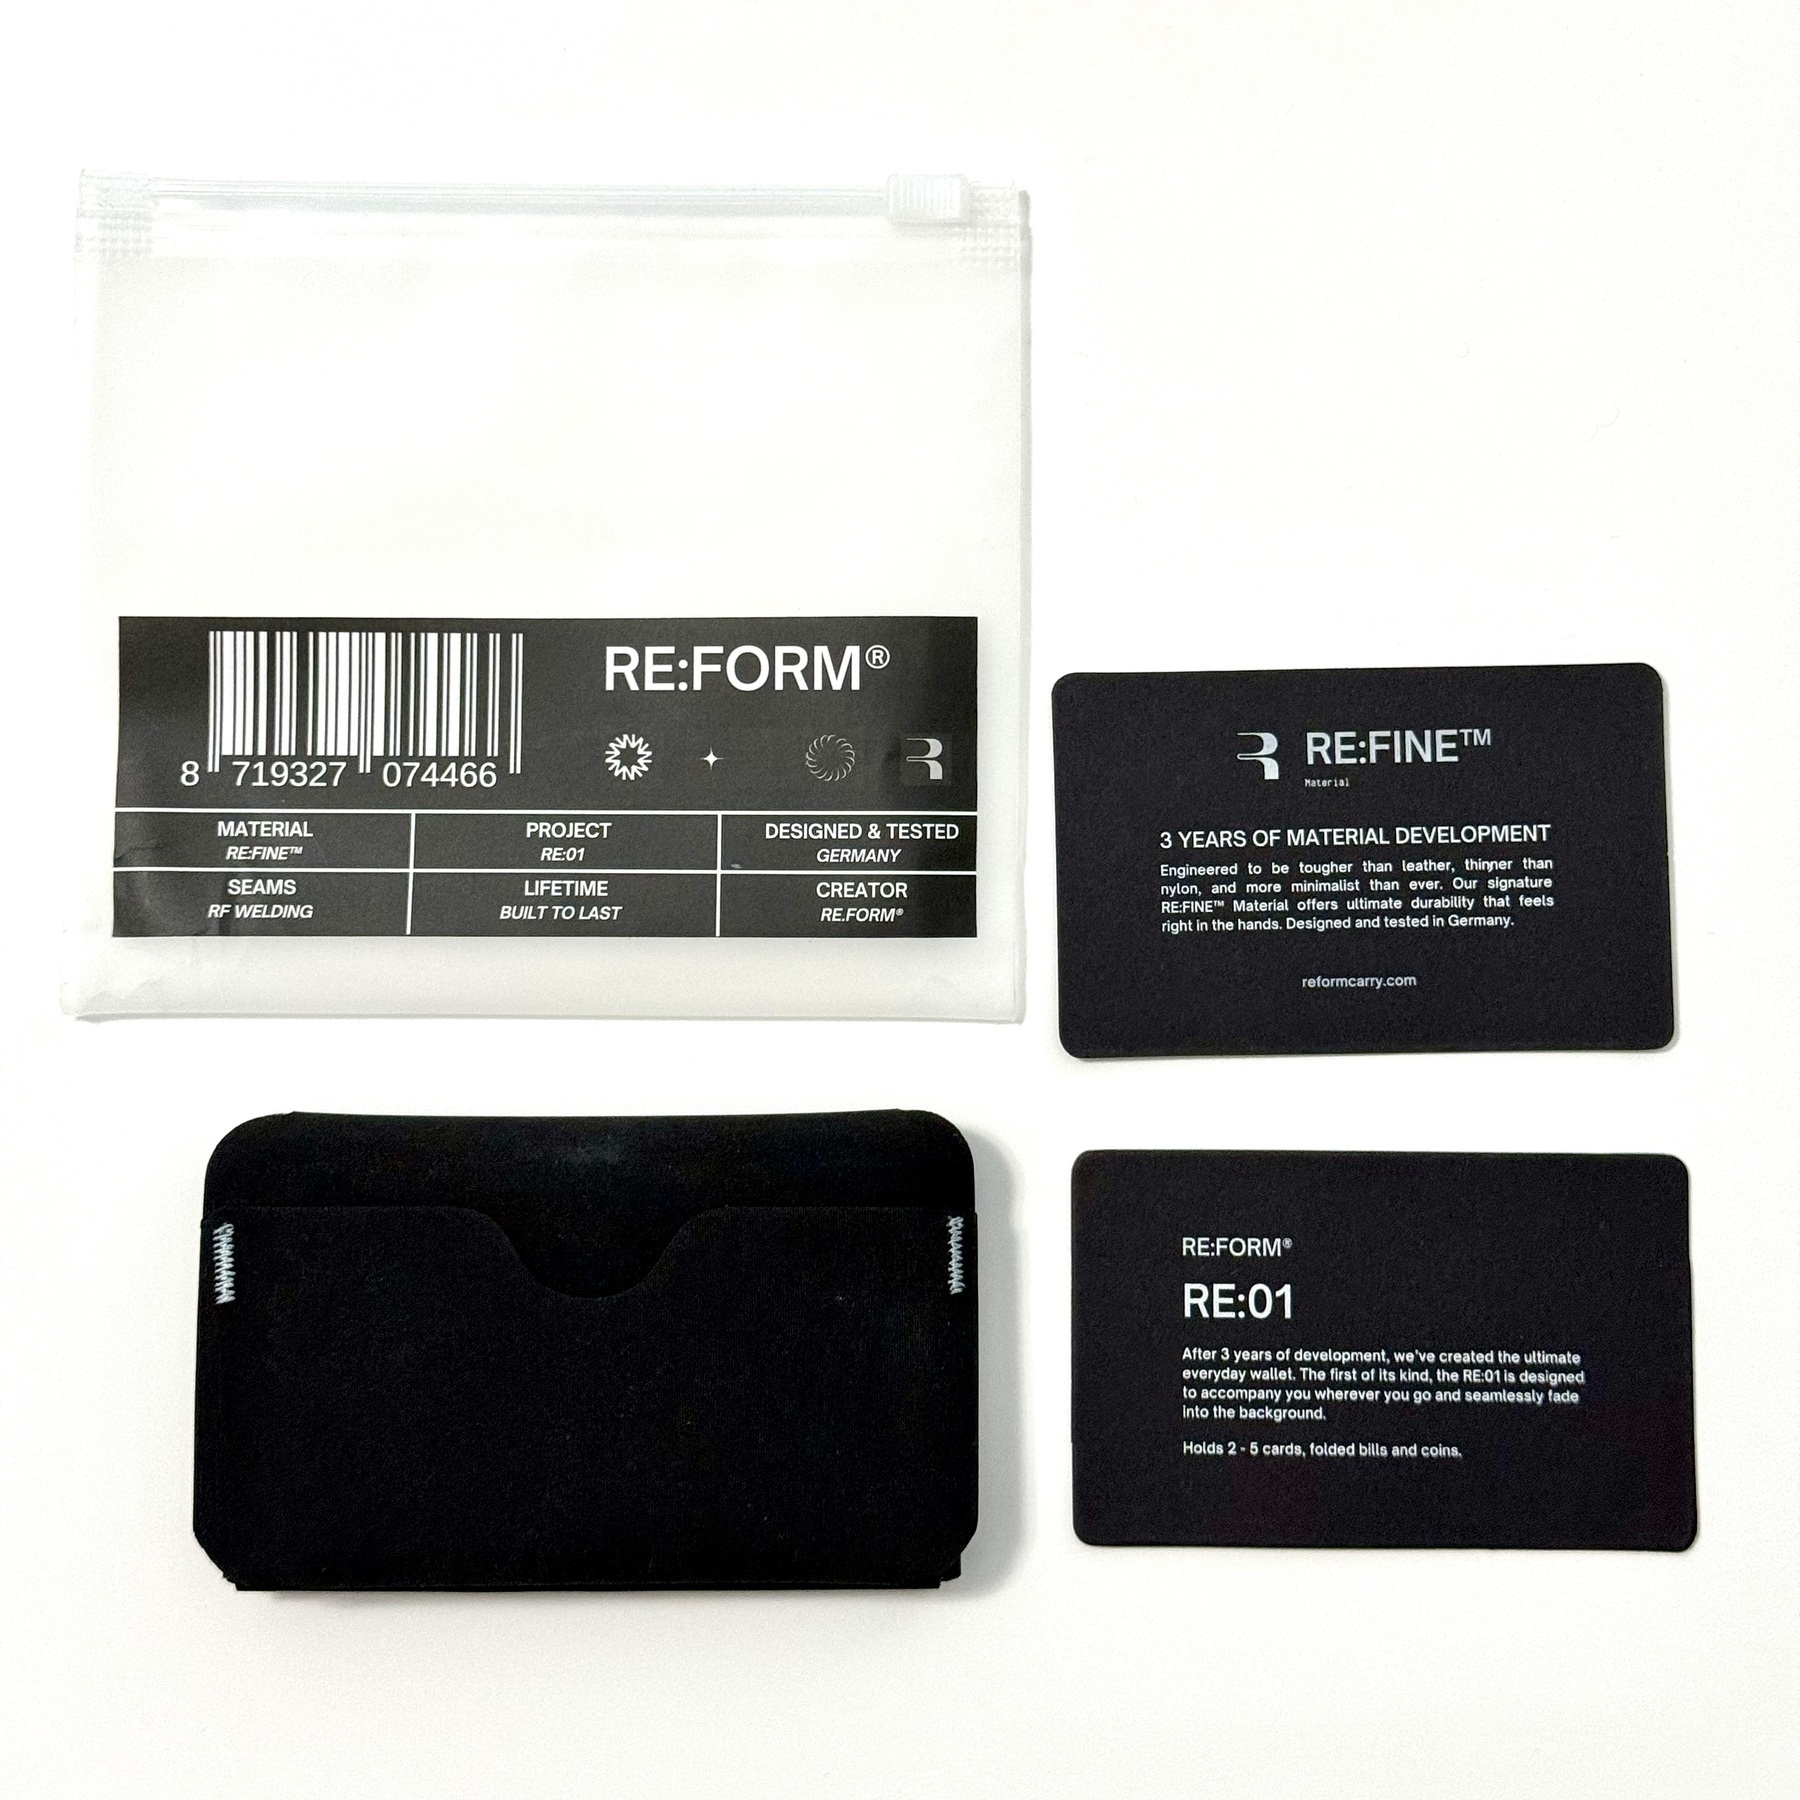 Re:Form Wallet laid out with packaging and in-sleeve materials on a white surface